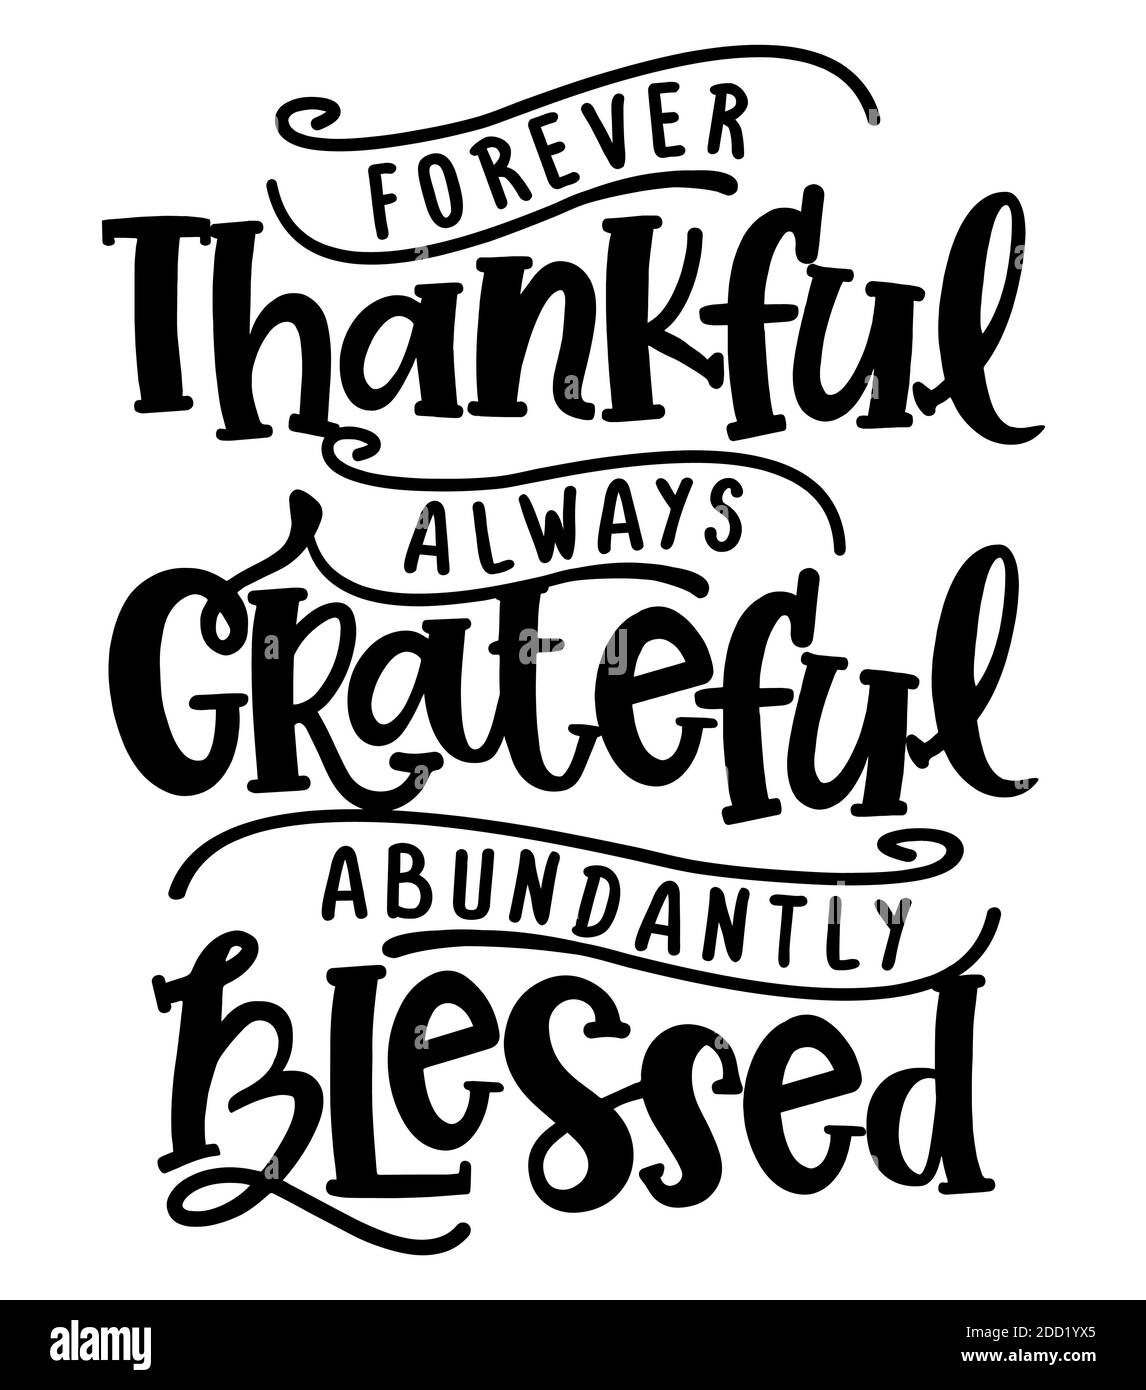 https://c8.alamy.com/comp/2DD1YX5/forever-thankful-always-grateful-abundantly-blessed-inspirational-thanksgiving-day-beautiful-handwritten-quote-decoration-lettering-message-han-2DD1YX5.jpg